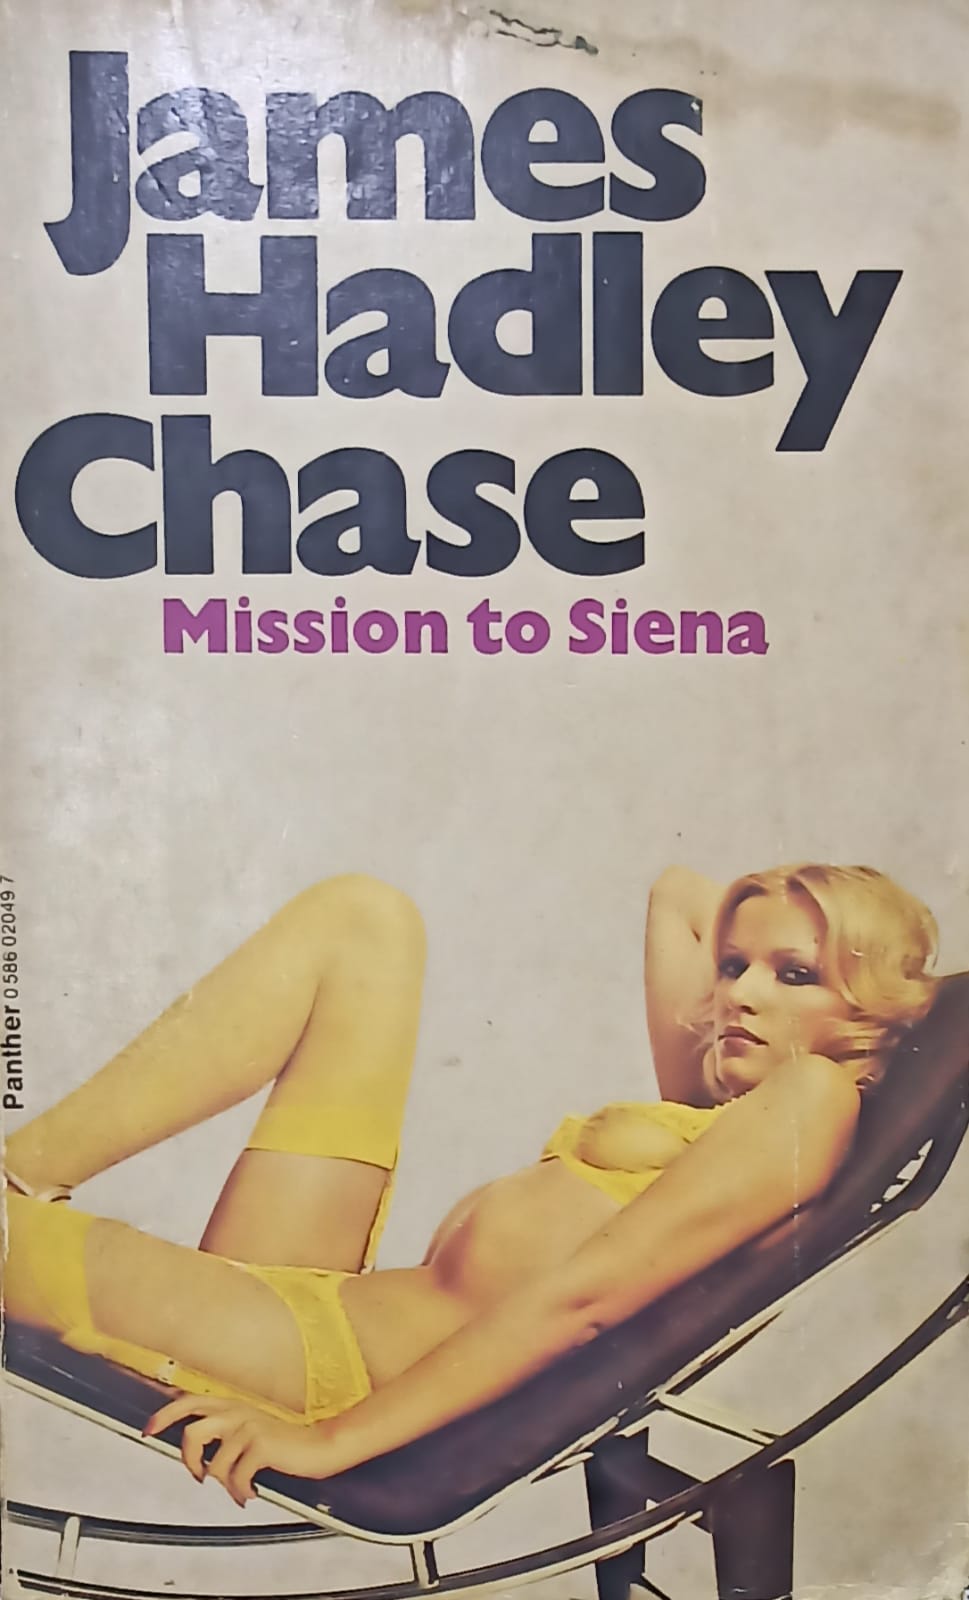 James Hadley Chase: Mission to Siena [Same Cover] (RARE BOOKS)